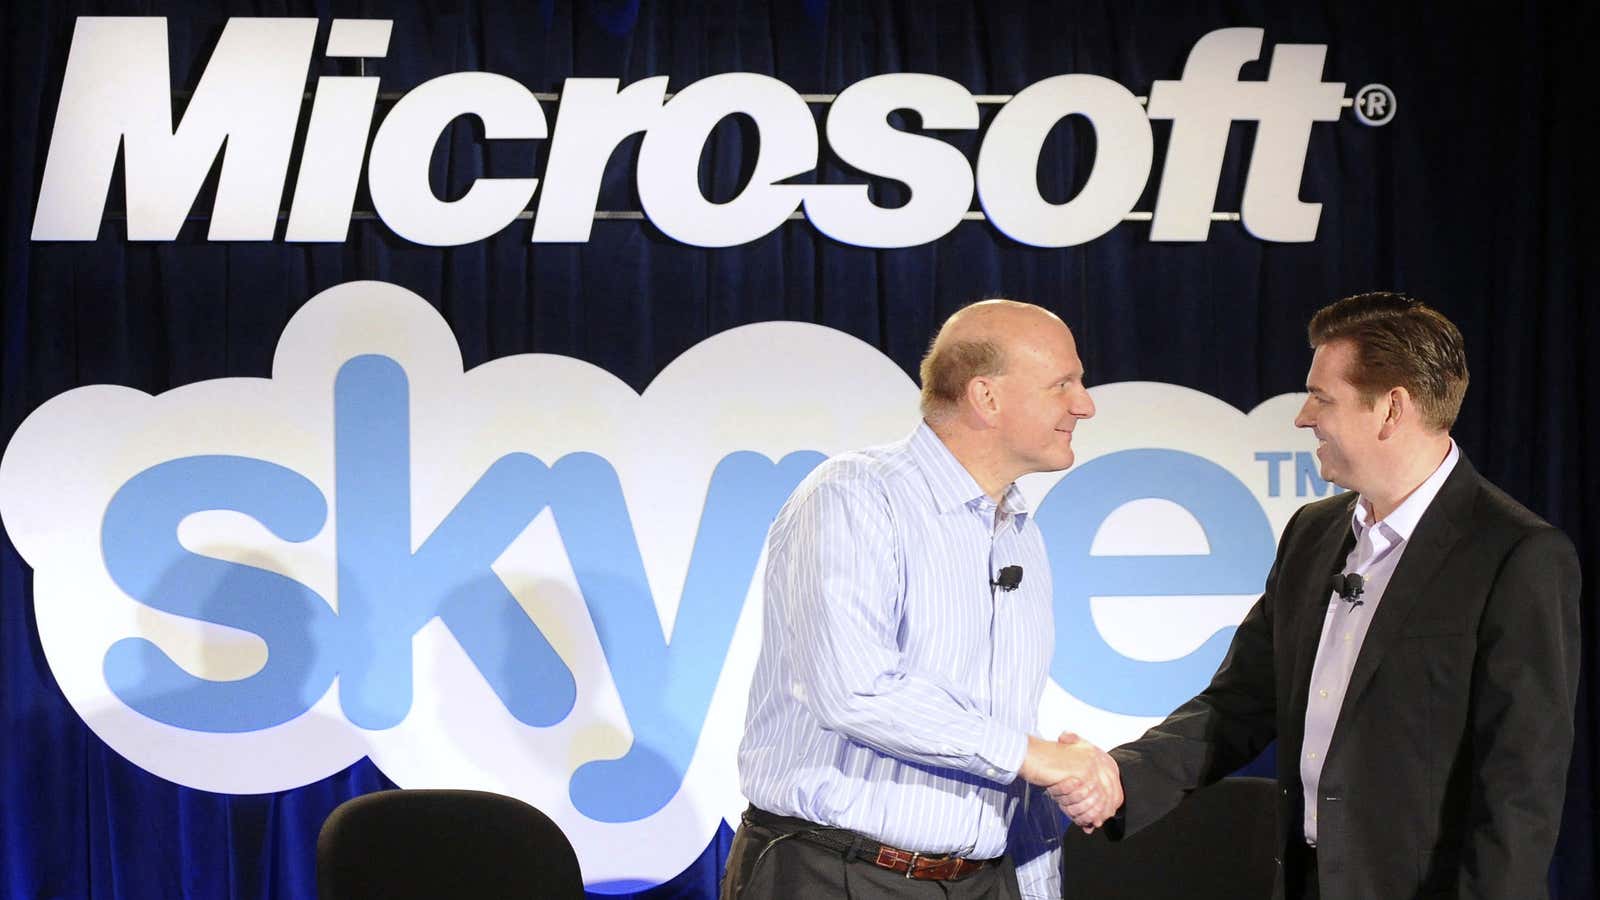 Its $8.5 billion sale to Microsoft in 2011 is one of Skype’s many stops in its 10 year history.